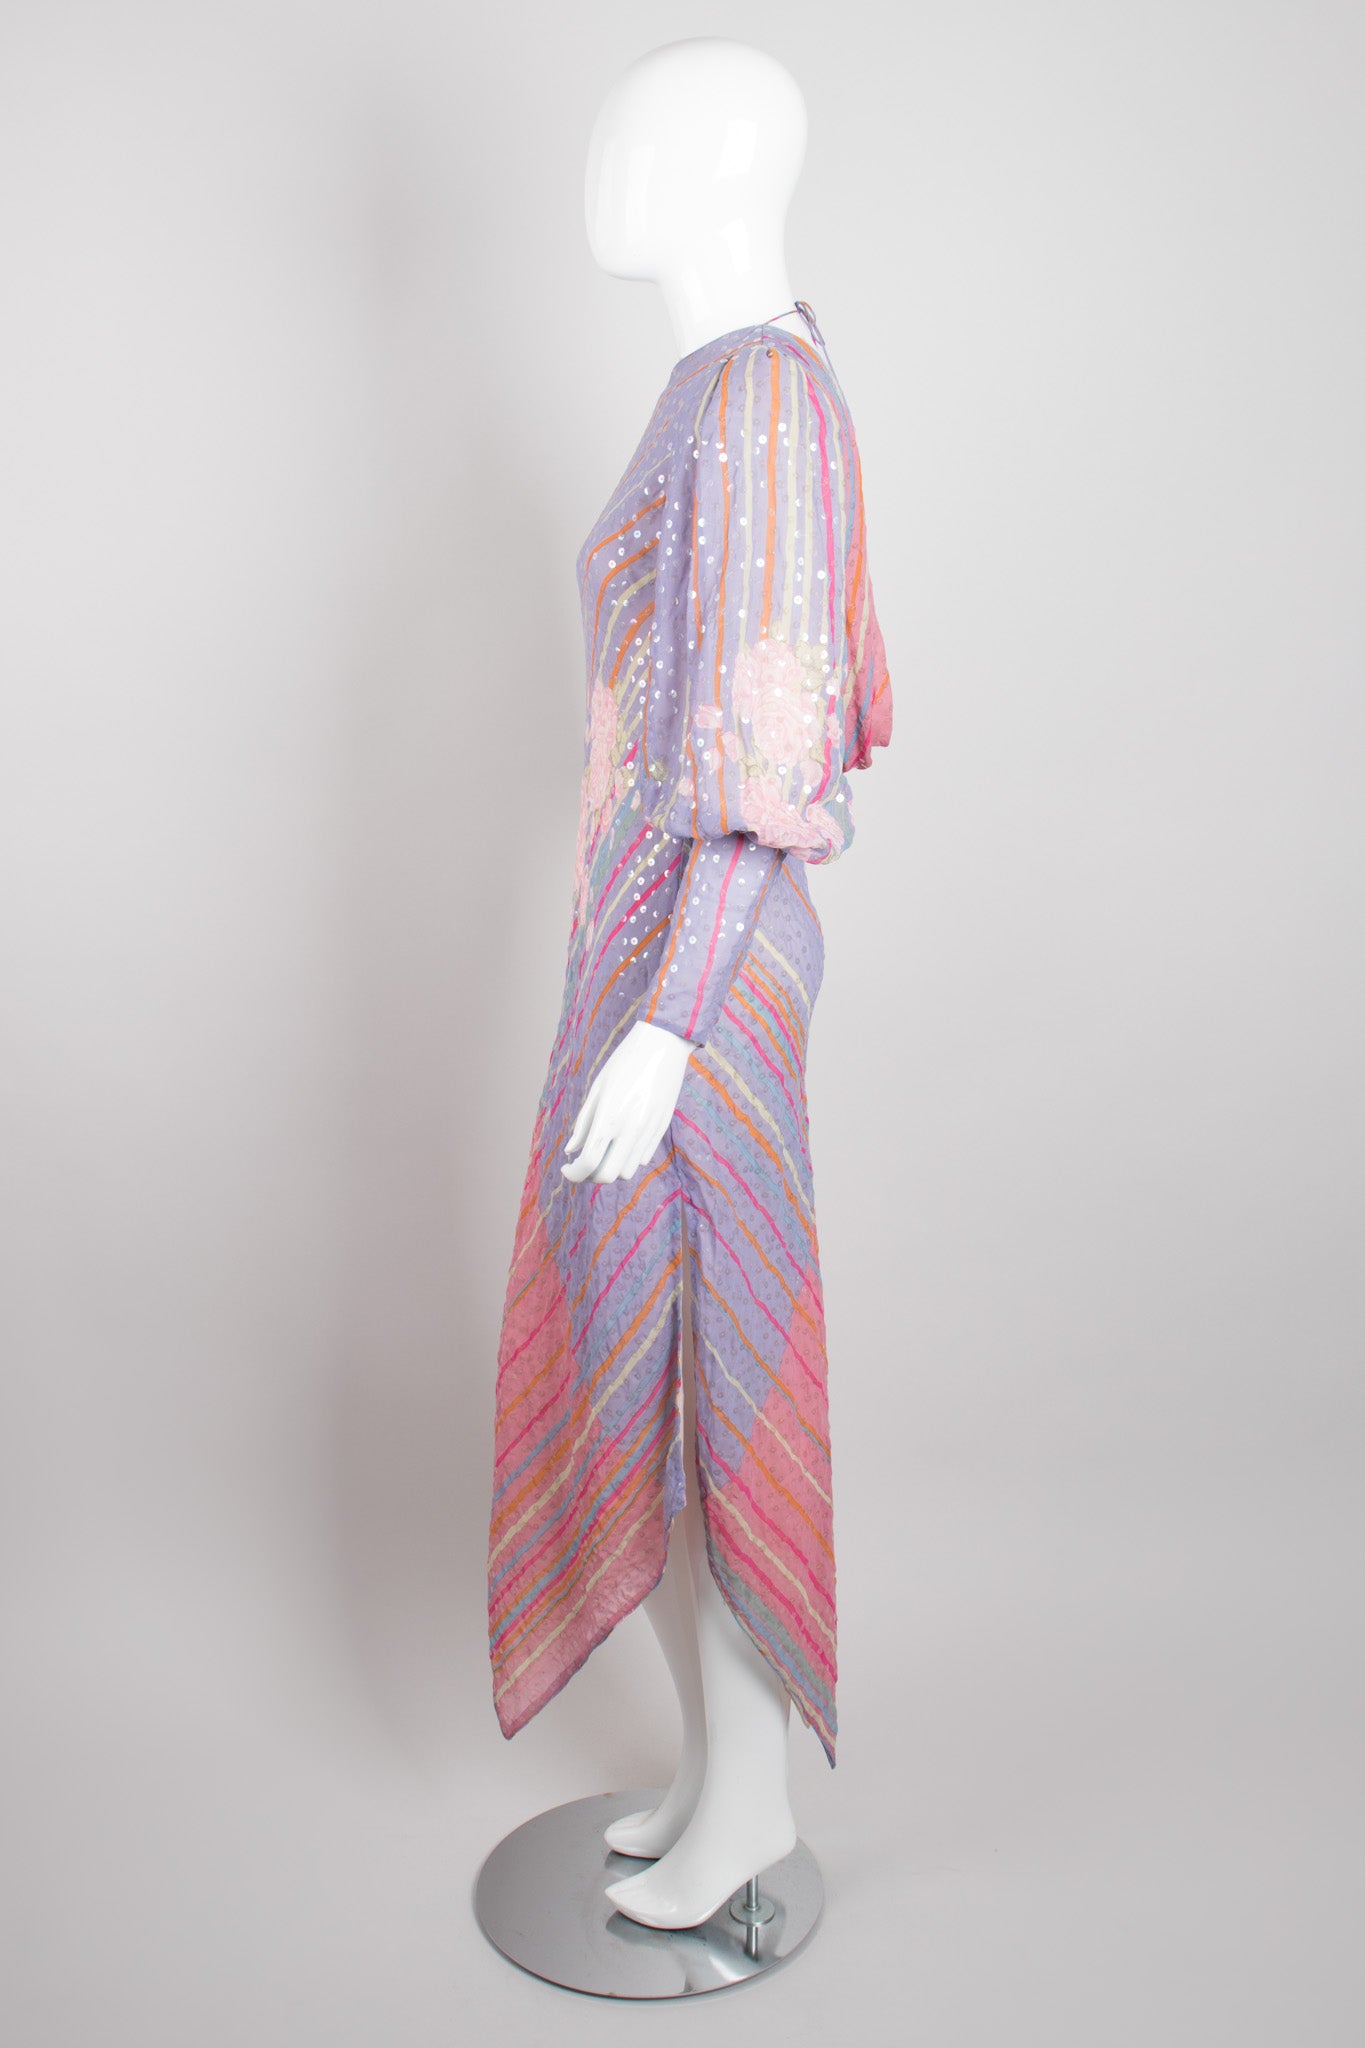 Recess Los Angeles Vintage Judy Hornby Pastel Sequin Chiffon Draped Cowl Back Bishop Sleeve Dress